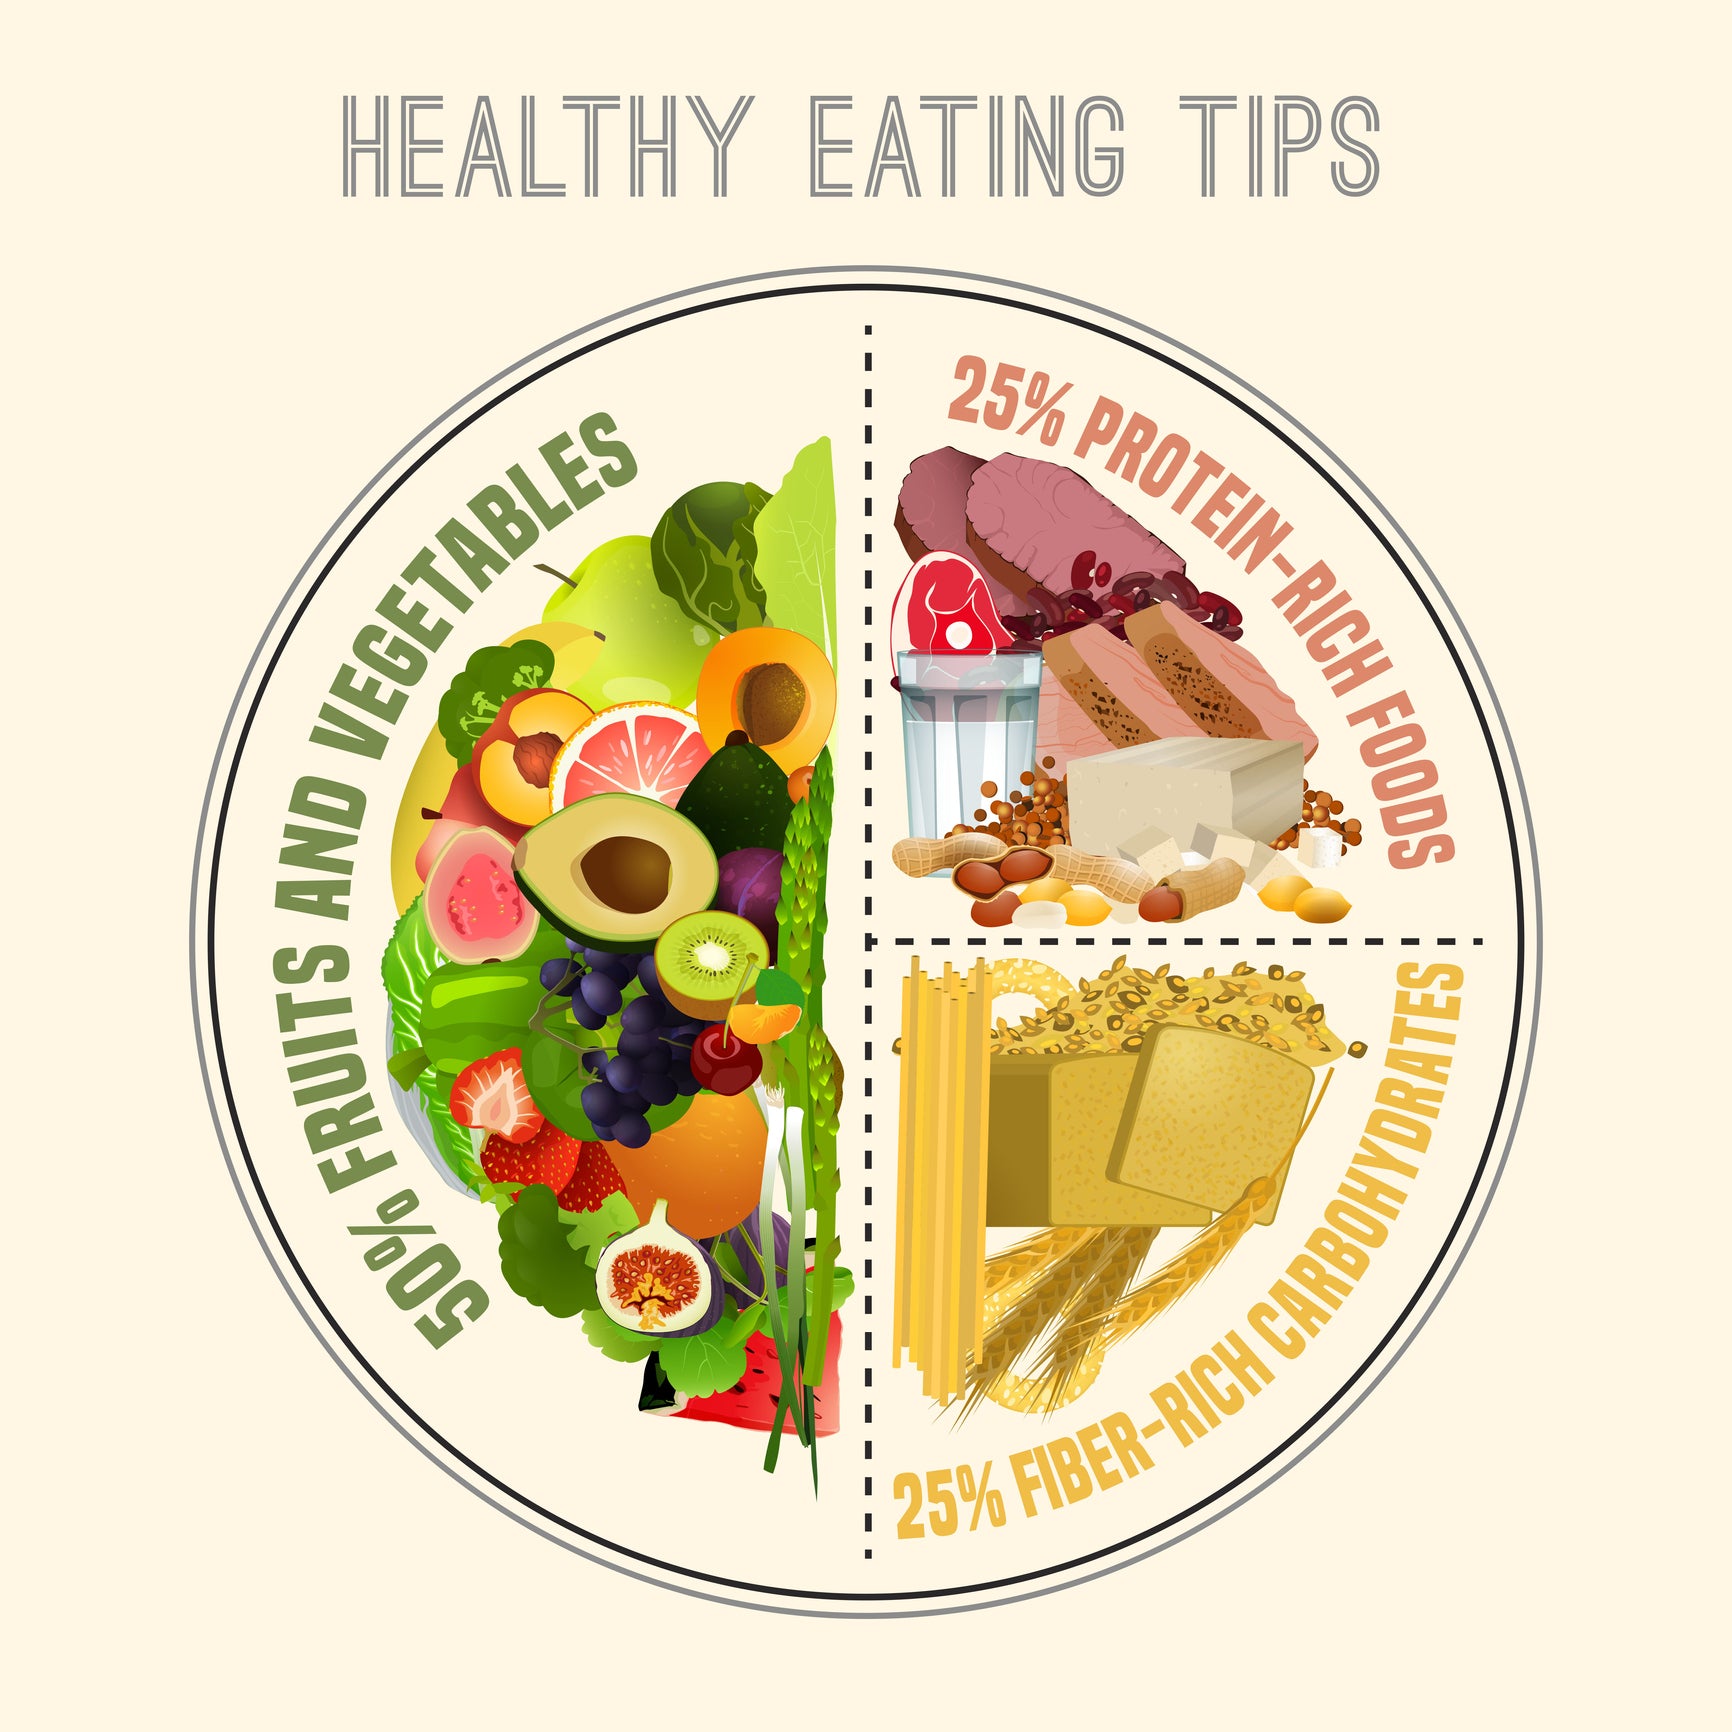 A graphic reading "Healthy Eating Tips" with an illustration of a plate of food and "50% fruits and vegetables", "25% protein-rich foods", and "25% fiber-rich carbohydrates"